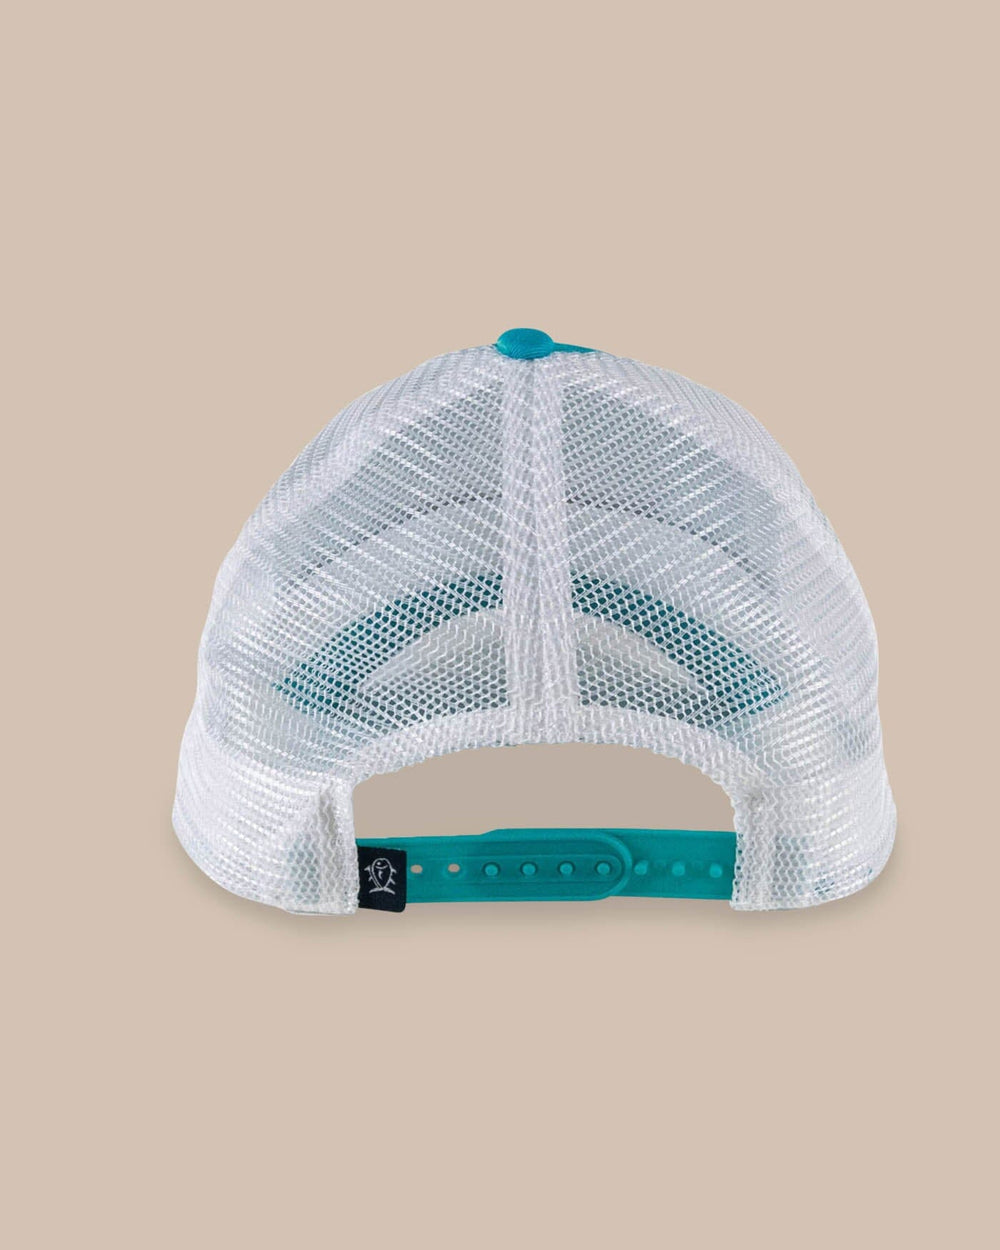 The back view of the Southern Tide Paddlin out Patch Trucker by Southern Tide - Turquoise